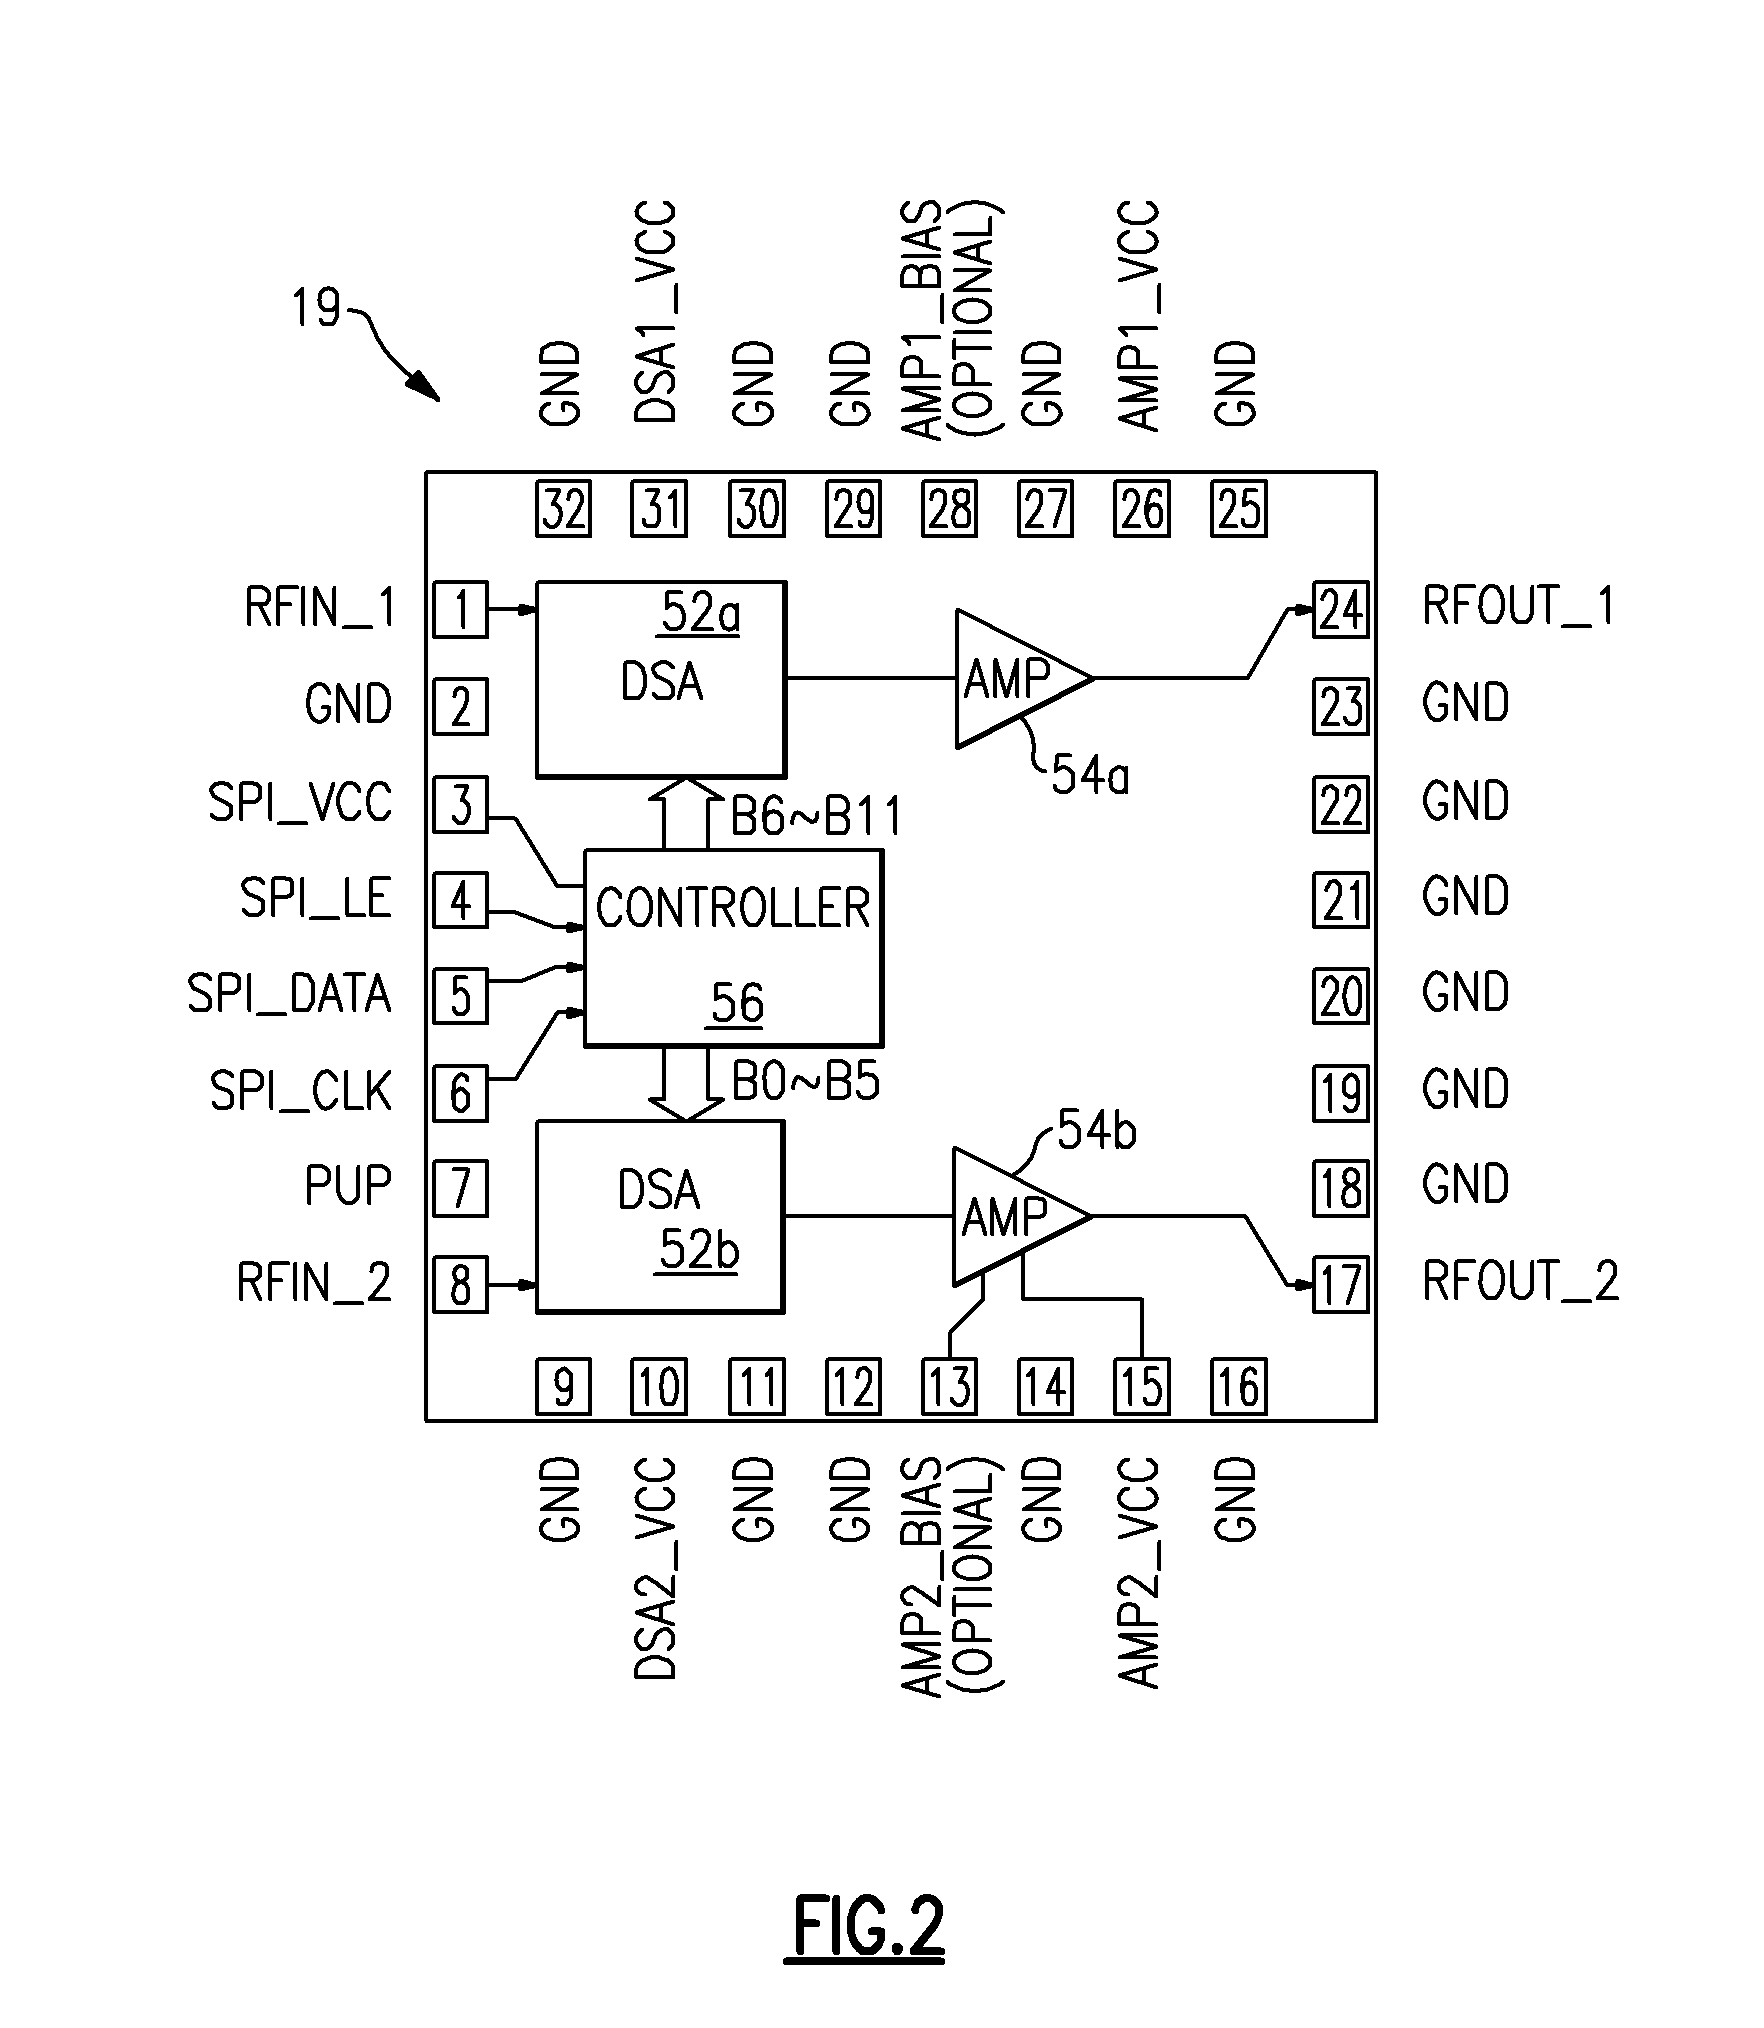 Variable frequency circuit controller